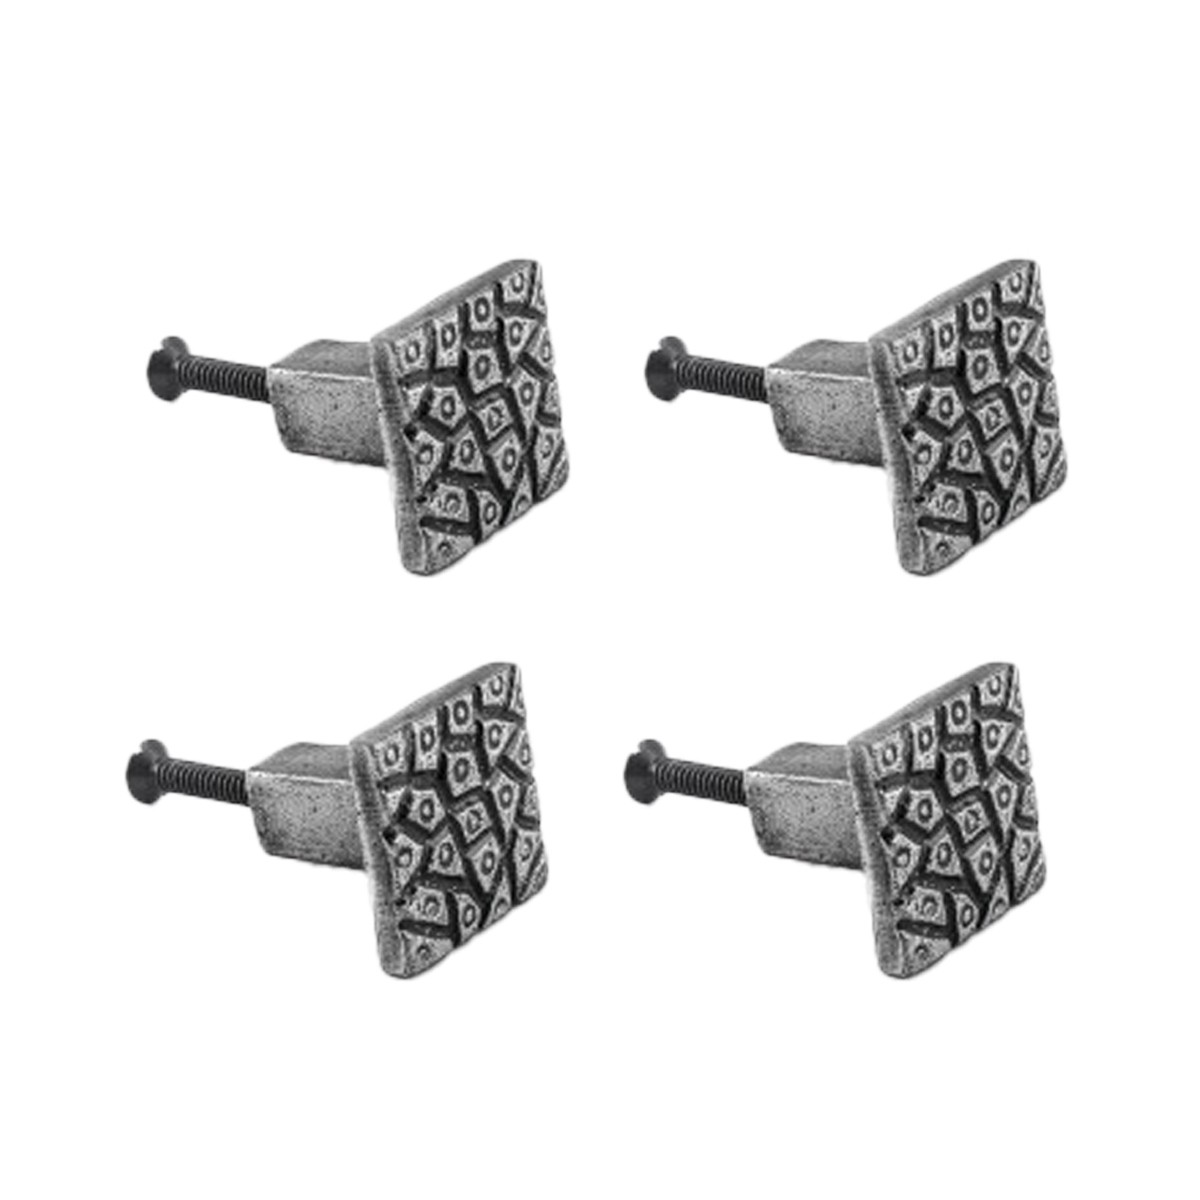 Renovators Supply Black Square Wrought Iron Cabinet Knob Pull Decorative Aztec Rust Resistant Vintage Metal Knobs for Kitchen Cabinet or Drawer Handles w/Screws Pack of 4 - image 1 of 9